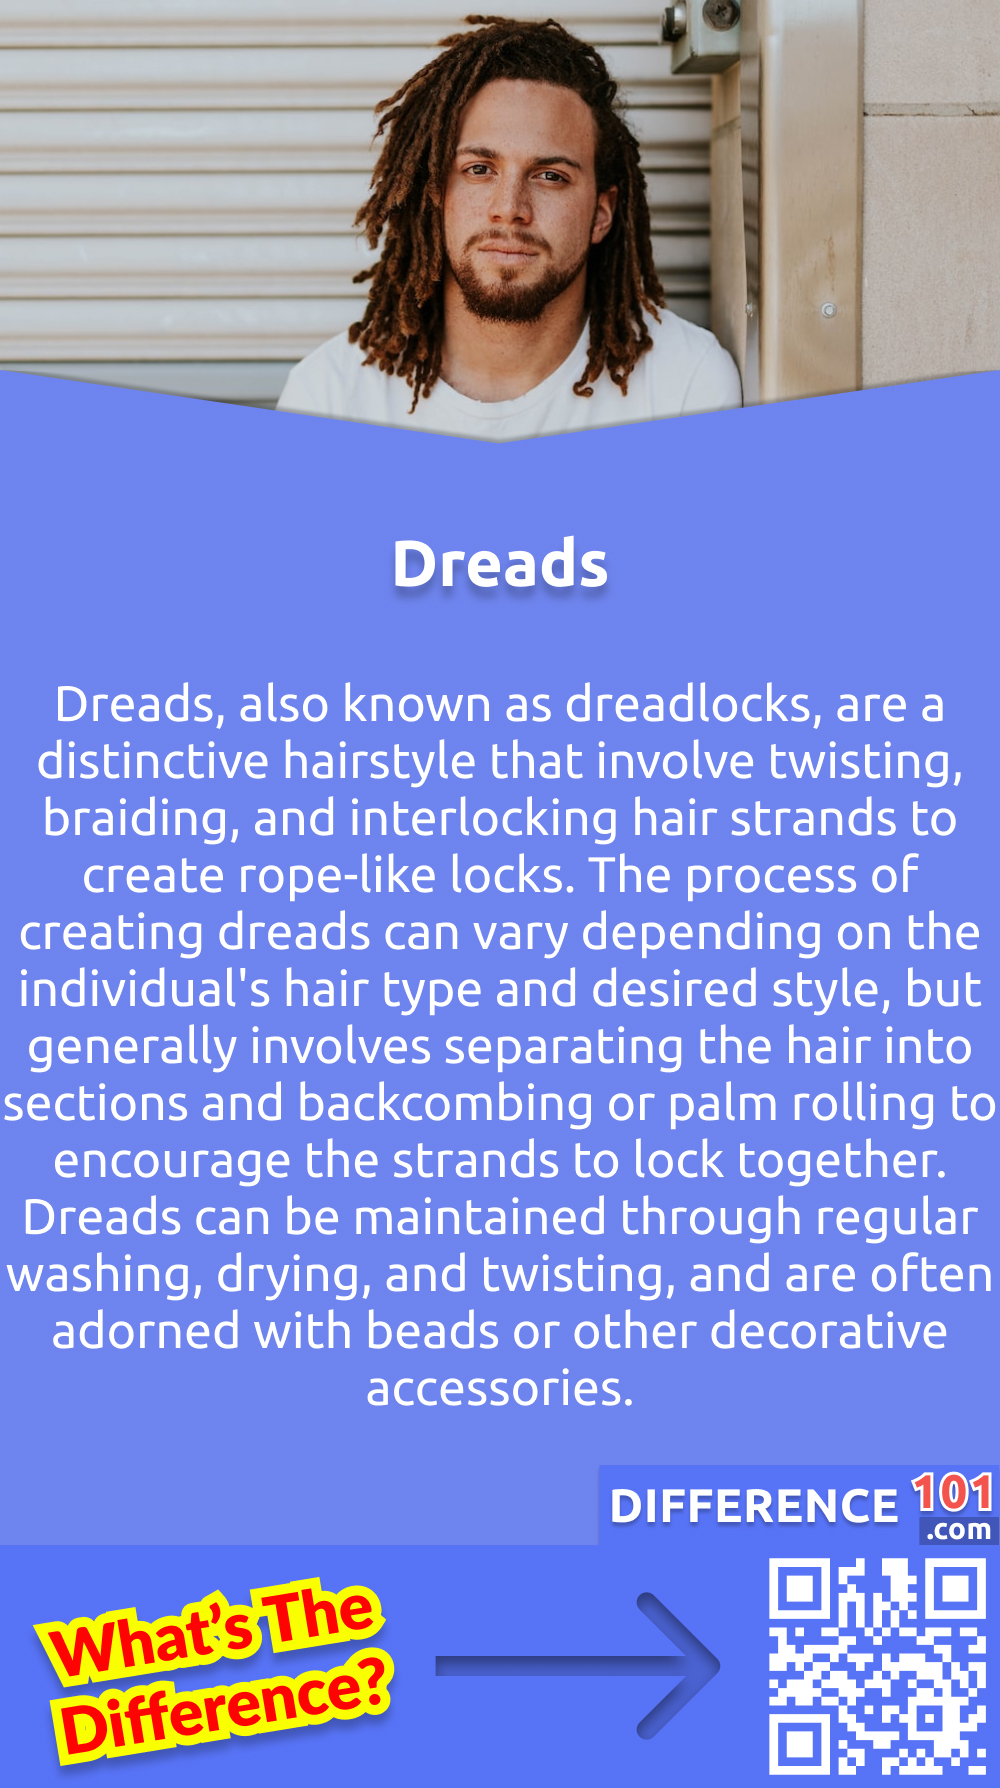 What Is Dreads? Dreads, also known as dreadlocks, are a distinctive hairstyle that involve twisting, braiding, and interlocking hair strands to create rope-like locks. The process of creating dreads can vary depending on the individual's hair type and desired style, but generally involves separating the hair into sections and backcombing or palm rolling to encourage the strands to lock together. Dreads can be maintained through regular washing, drying, and twisting, and are often adorned with beads or other decorative accessories. While traditionally associated with Rastafarian culture, dreads have become more mainstream in recent years and can be worn by people of all ages and backgrounds.